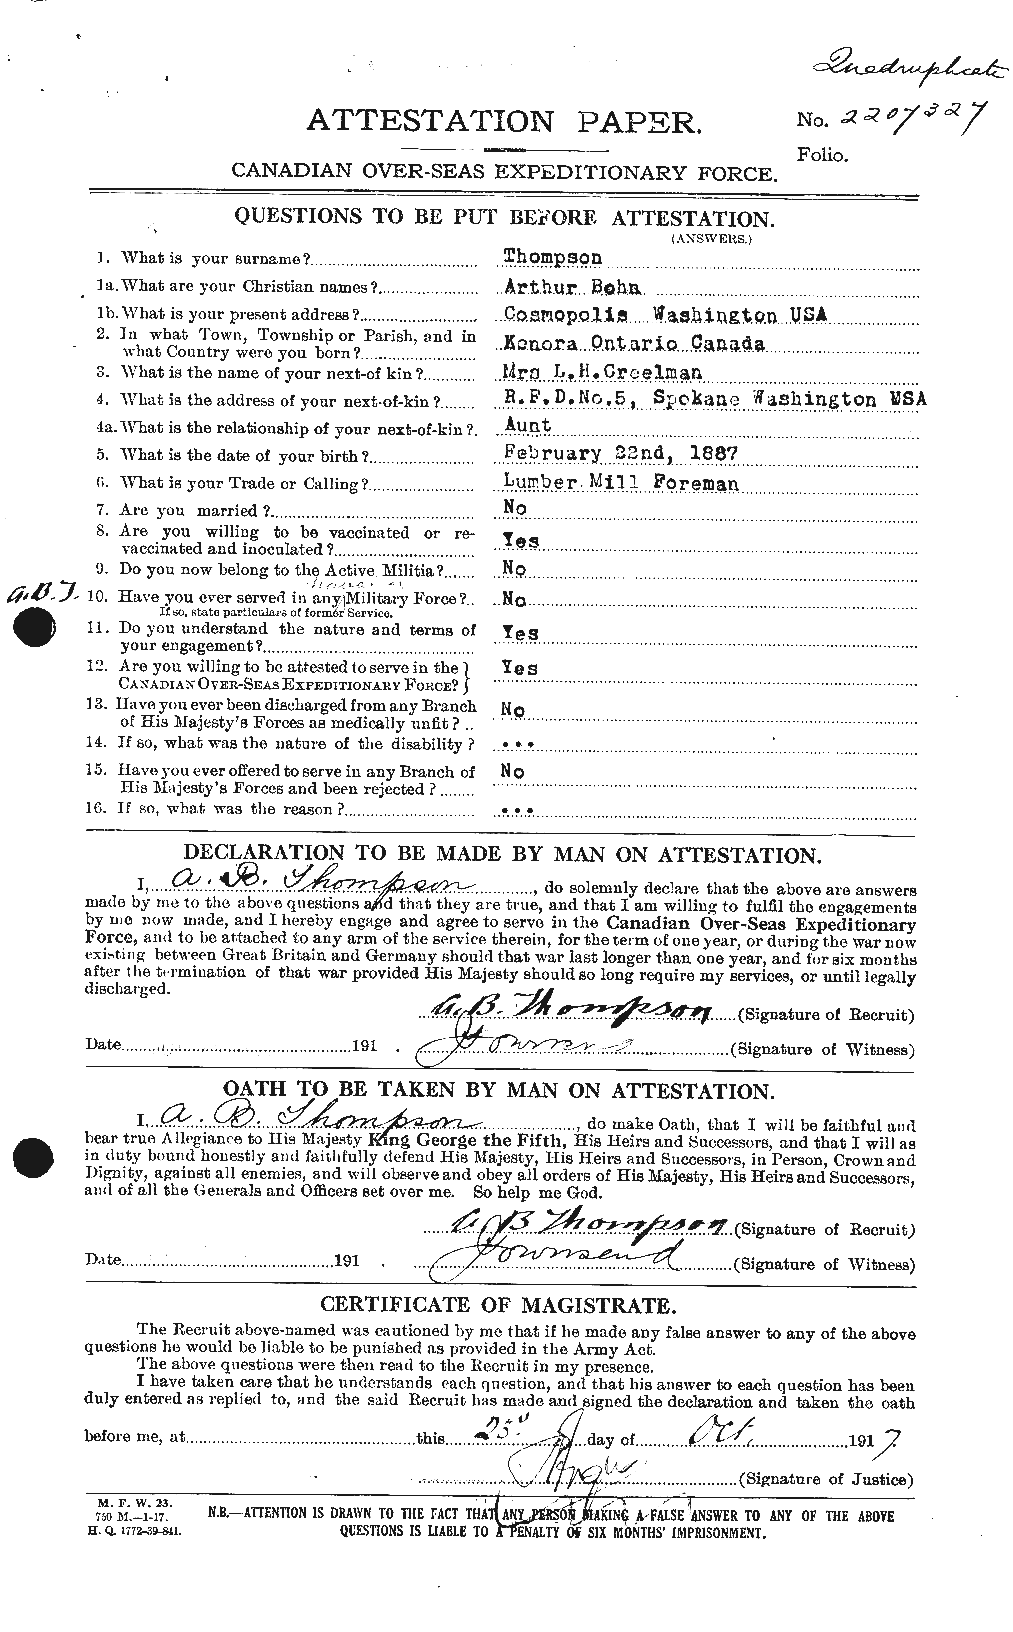 Personnel Records of the First World War - CEF 630287a